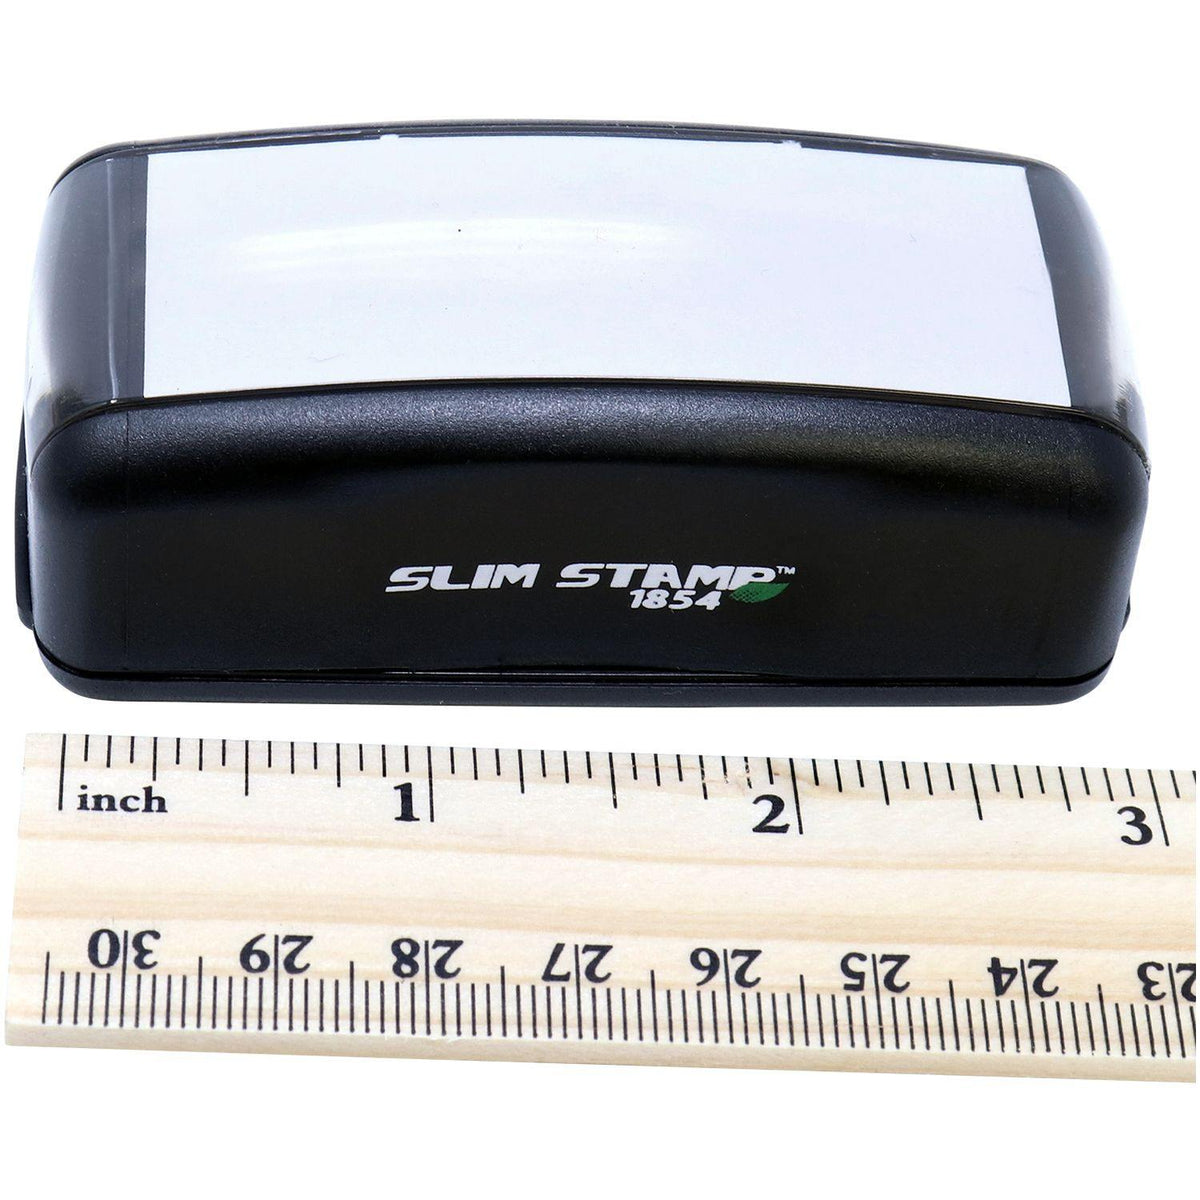 Measurement Large Pre-Inked Extra Credit Stamp with Ruler